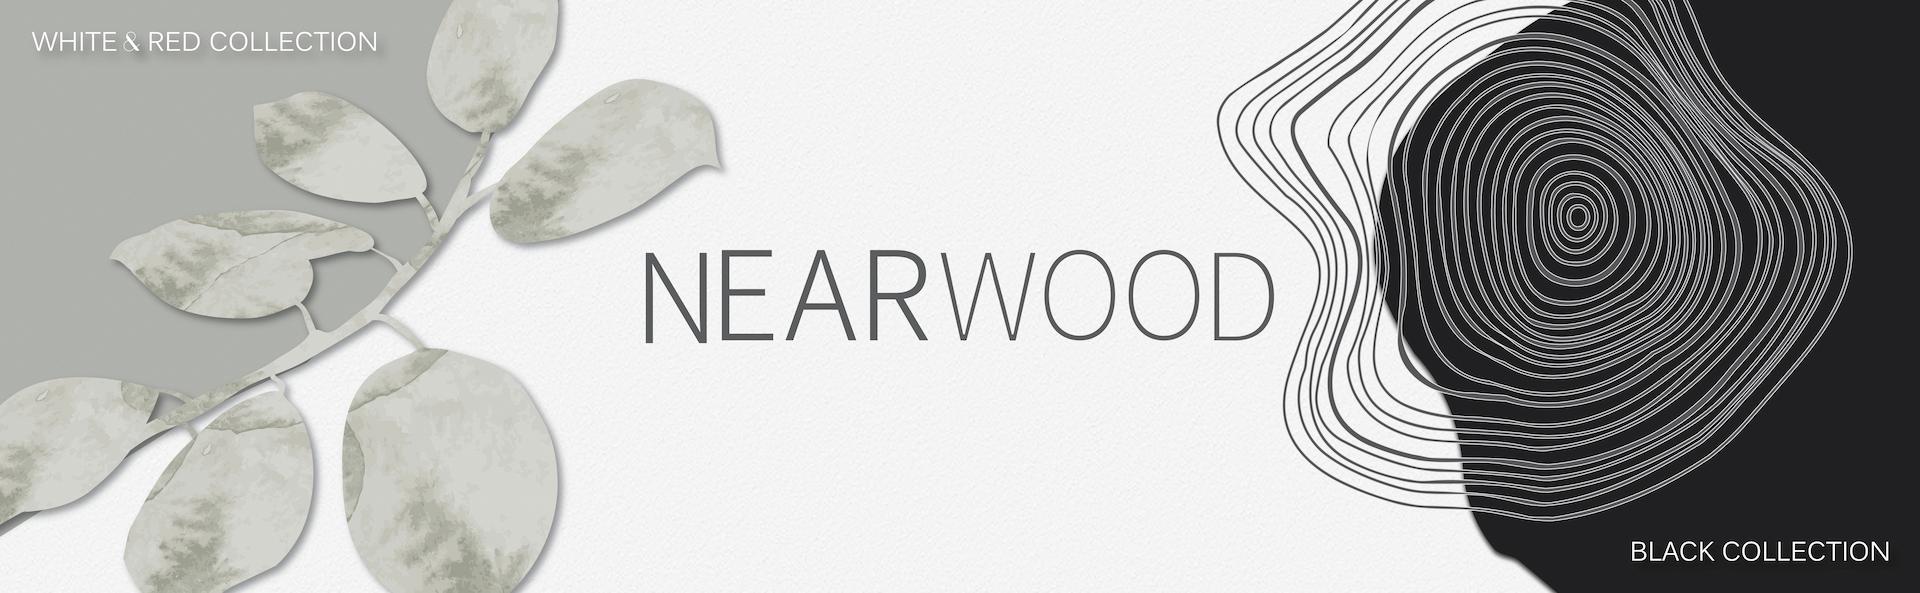 Nearwood Collections